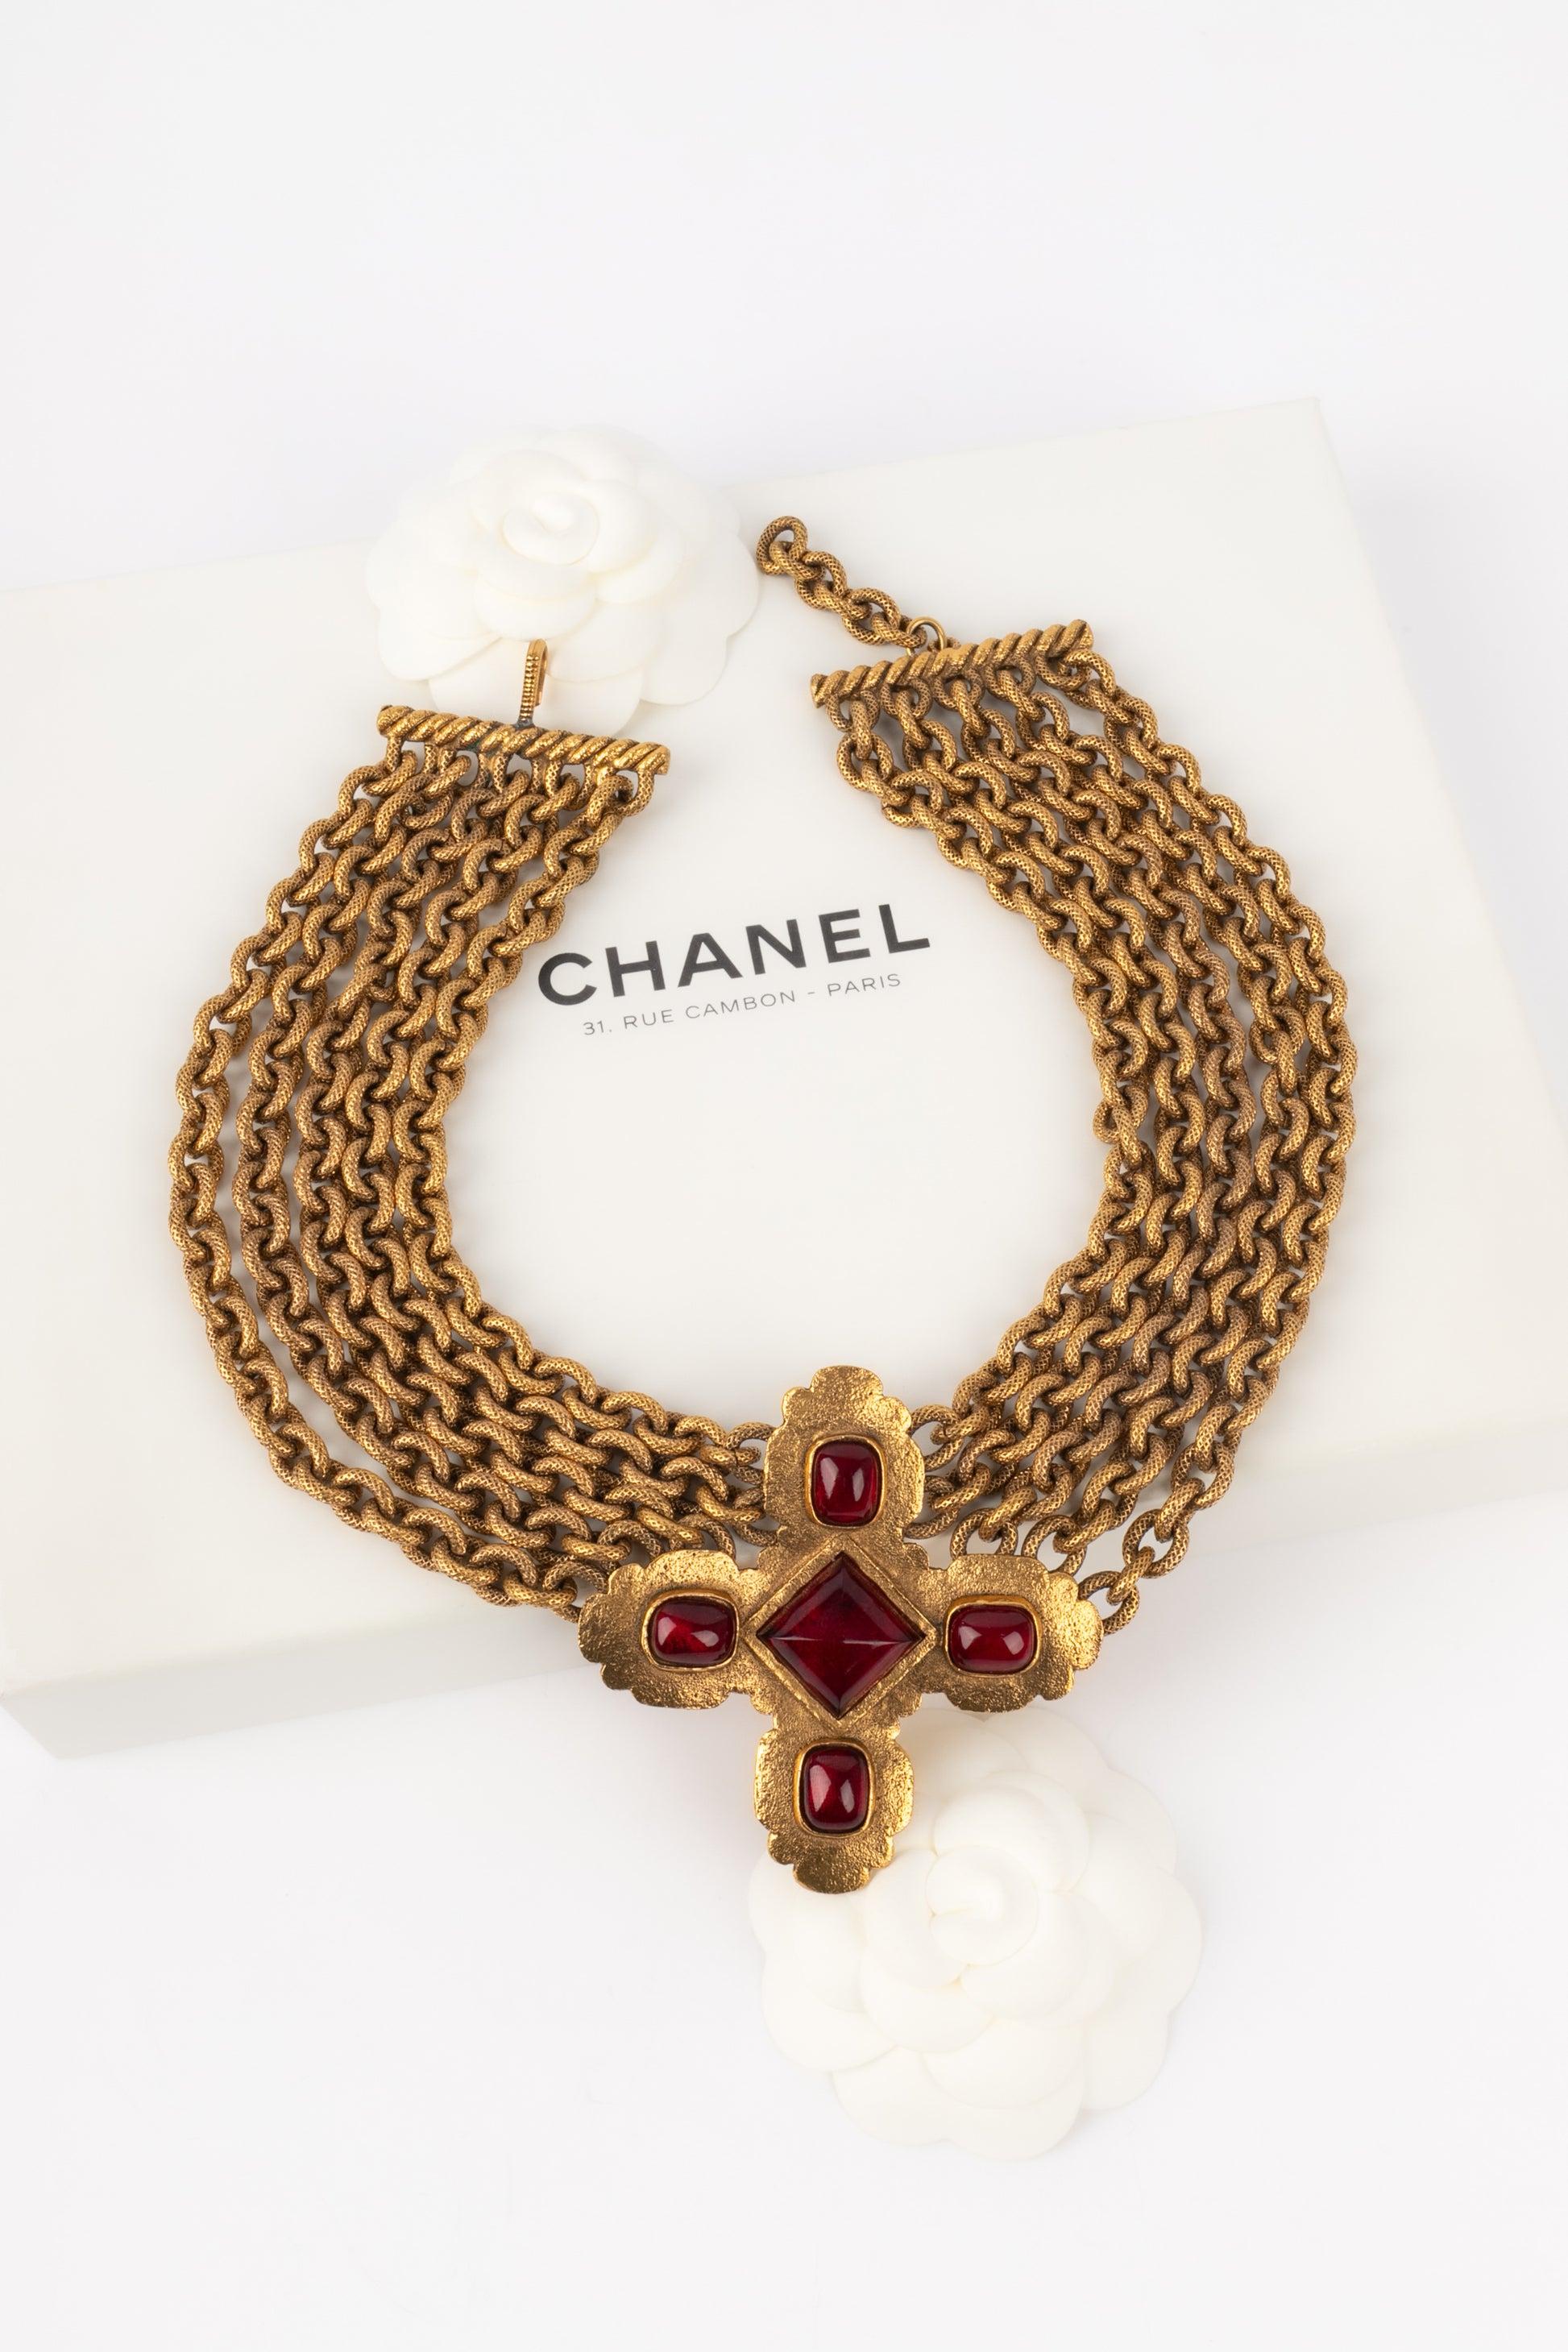 Chanel Cross Golden Metal Short Necklace with Red Glass Paste, 1990s For Sale 5